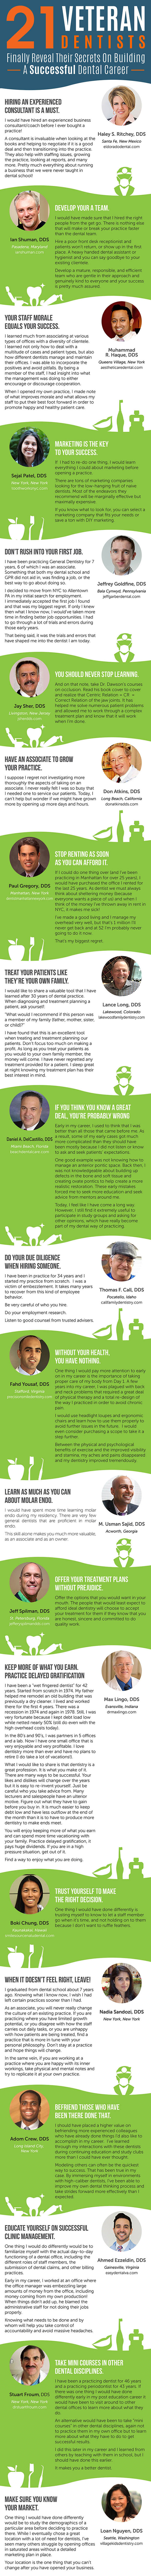 Veteran dentists share their secrets for success. Infographic.